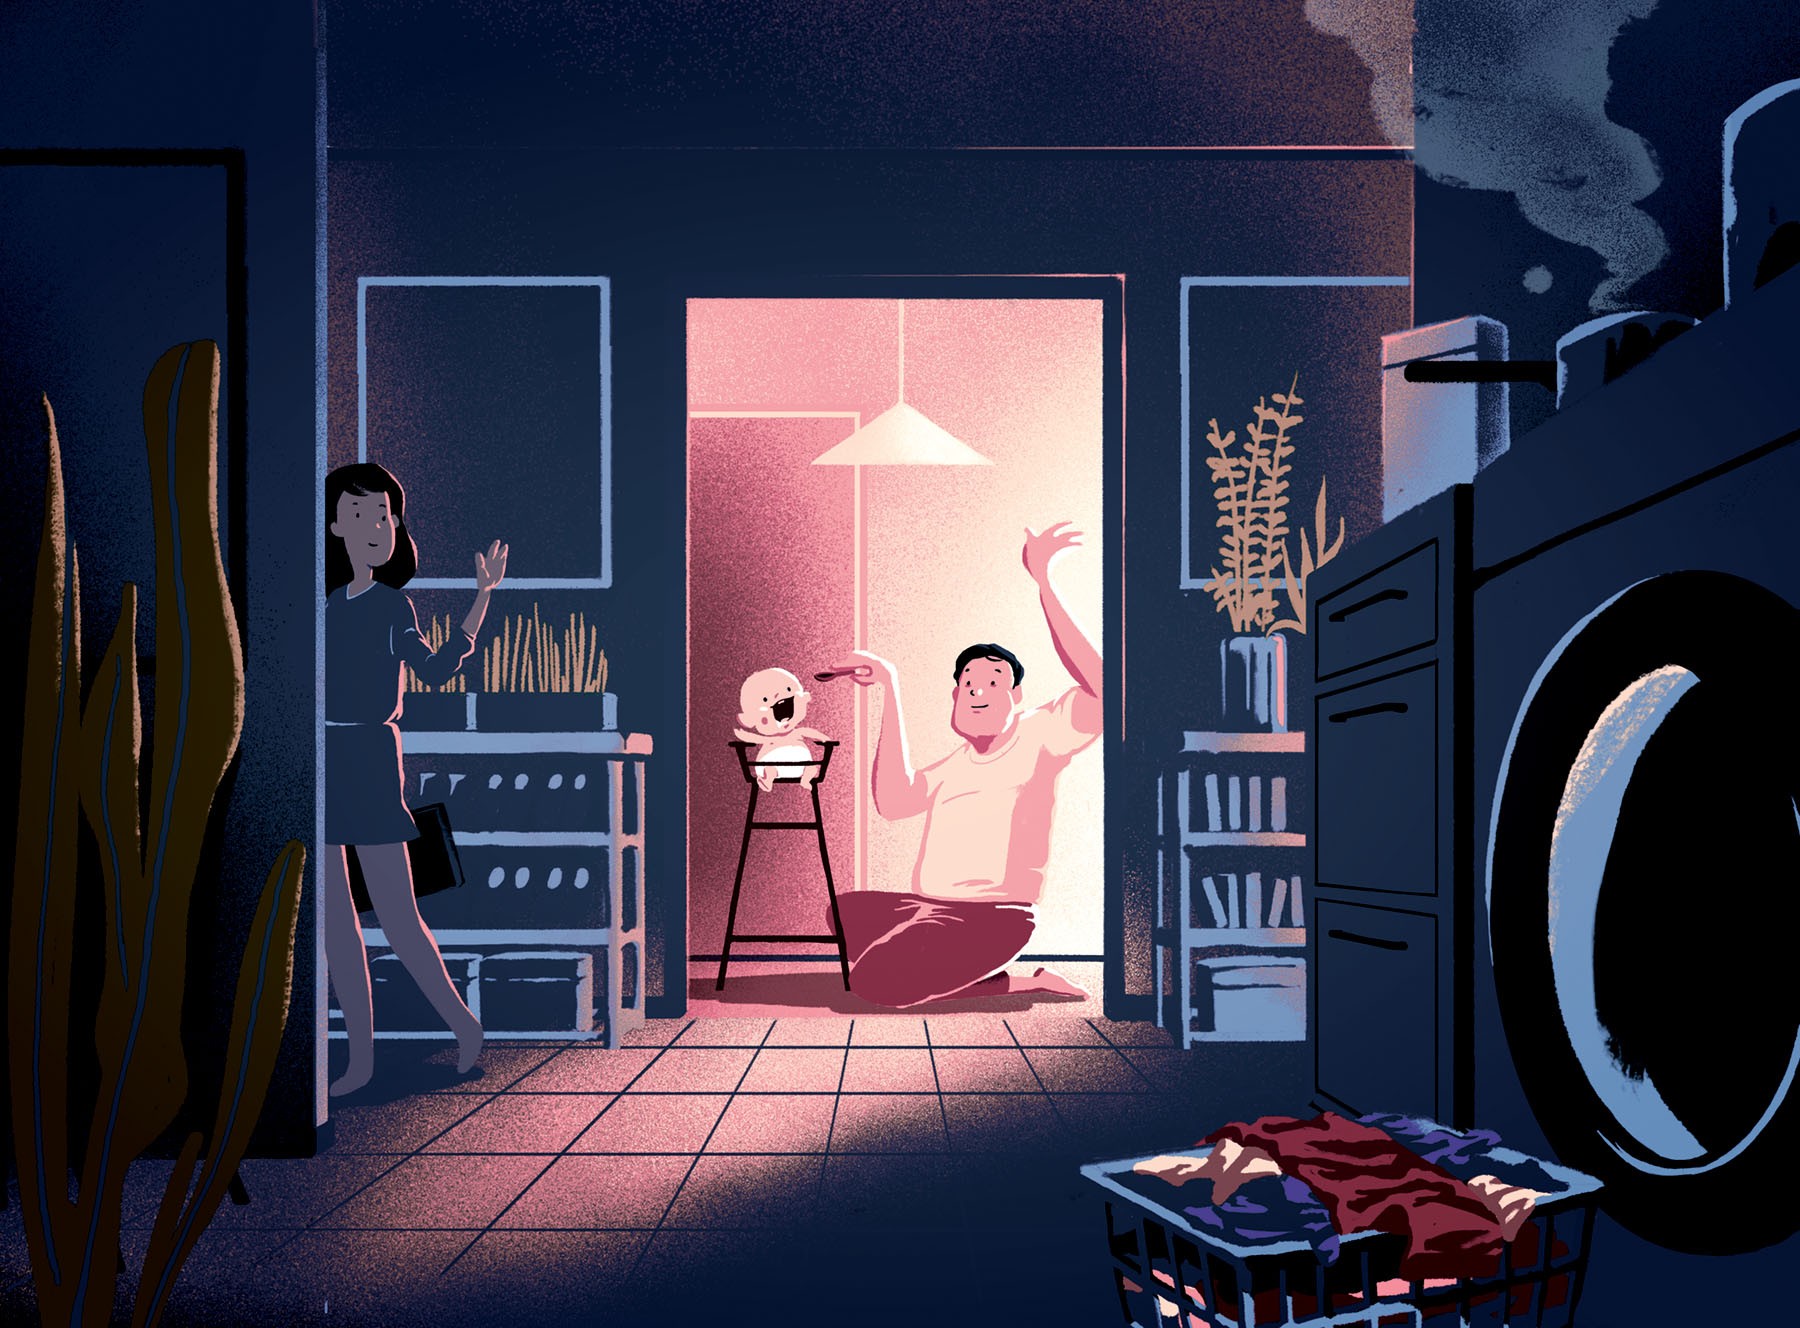 House husbands are no longer the rare breed they once were in Japan. Illustrations: Perry Tse